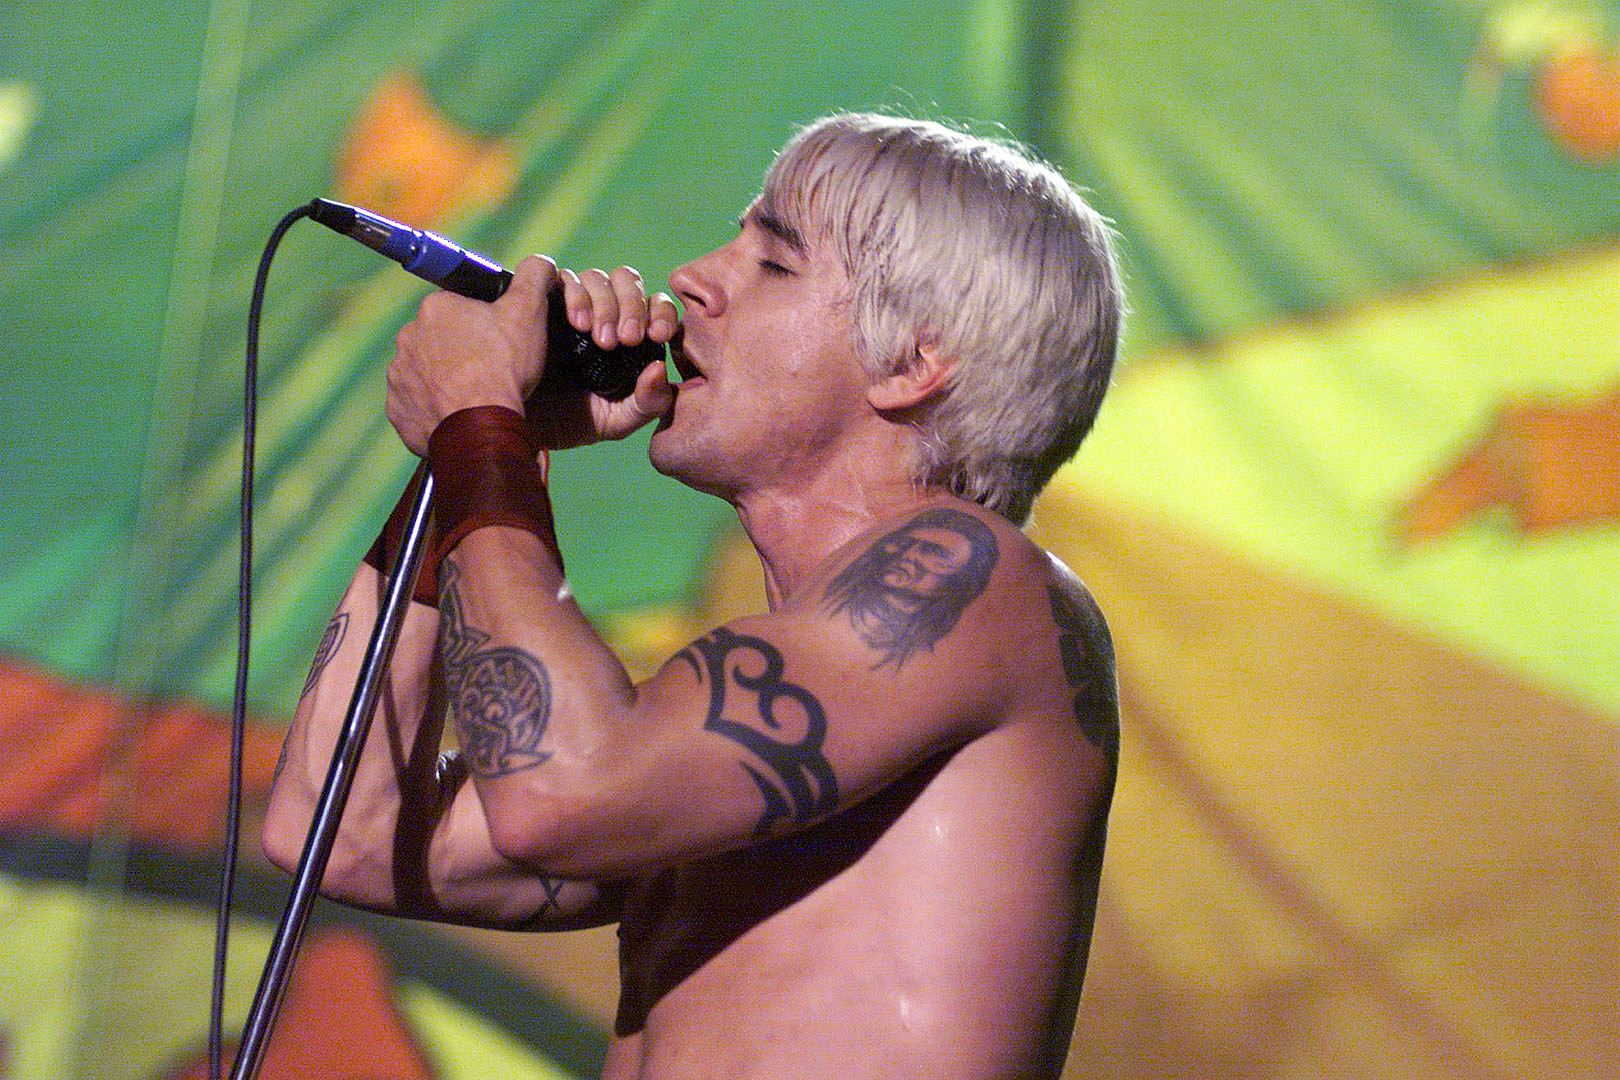 Red Hot Chili Peppers Were Not Instigating Woodstock 99 Riot